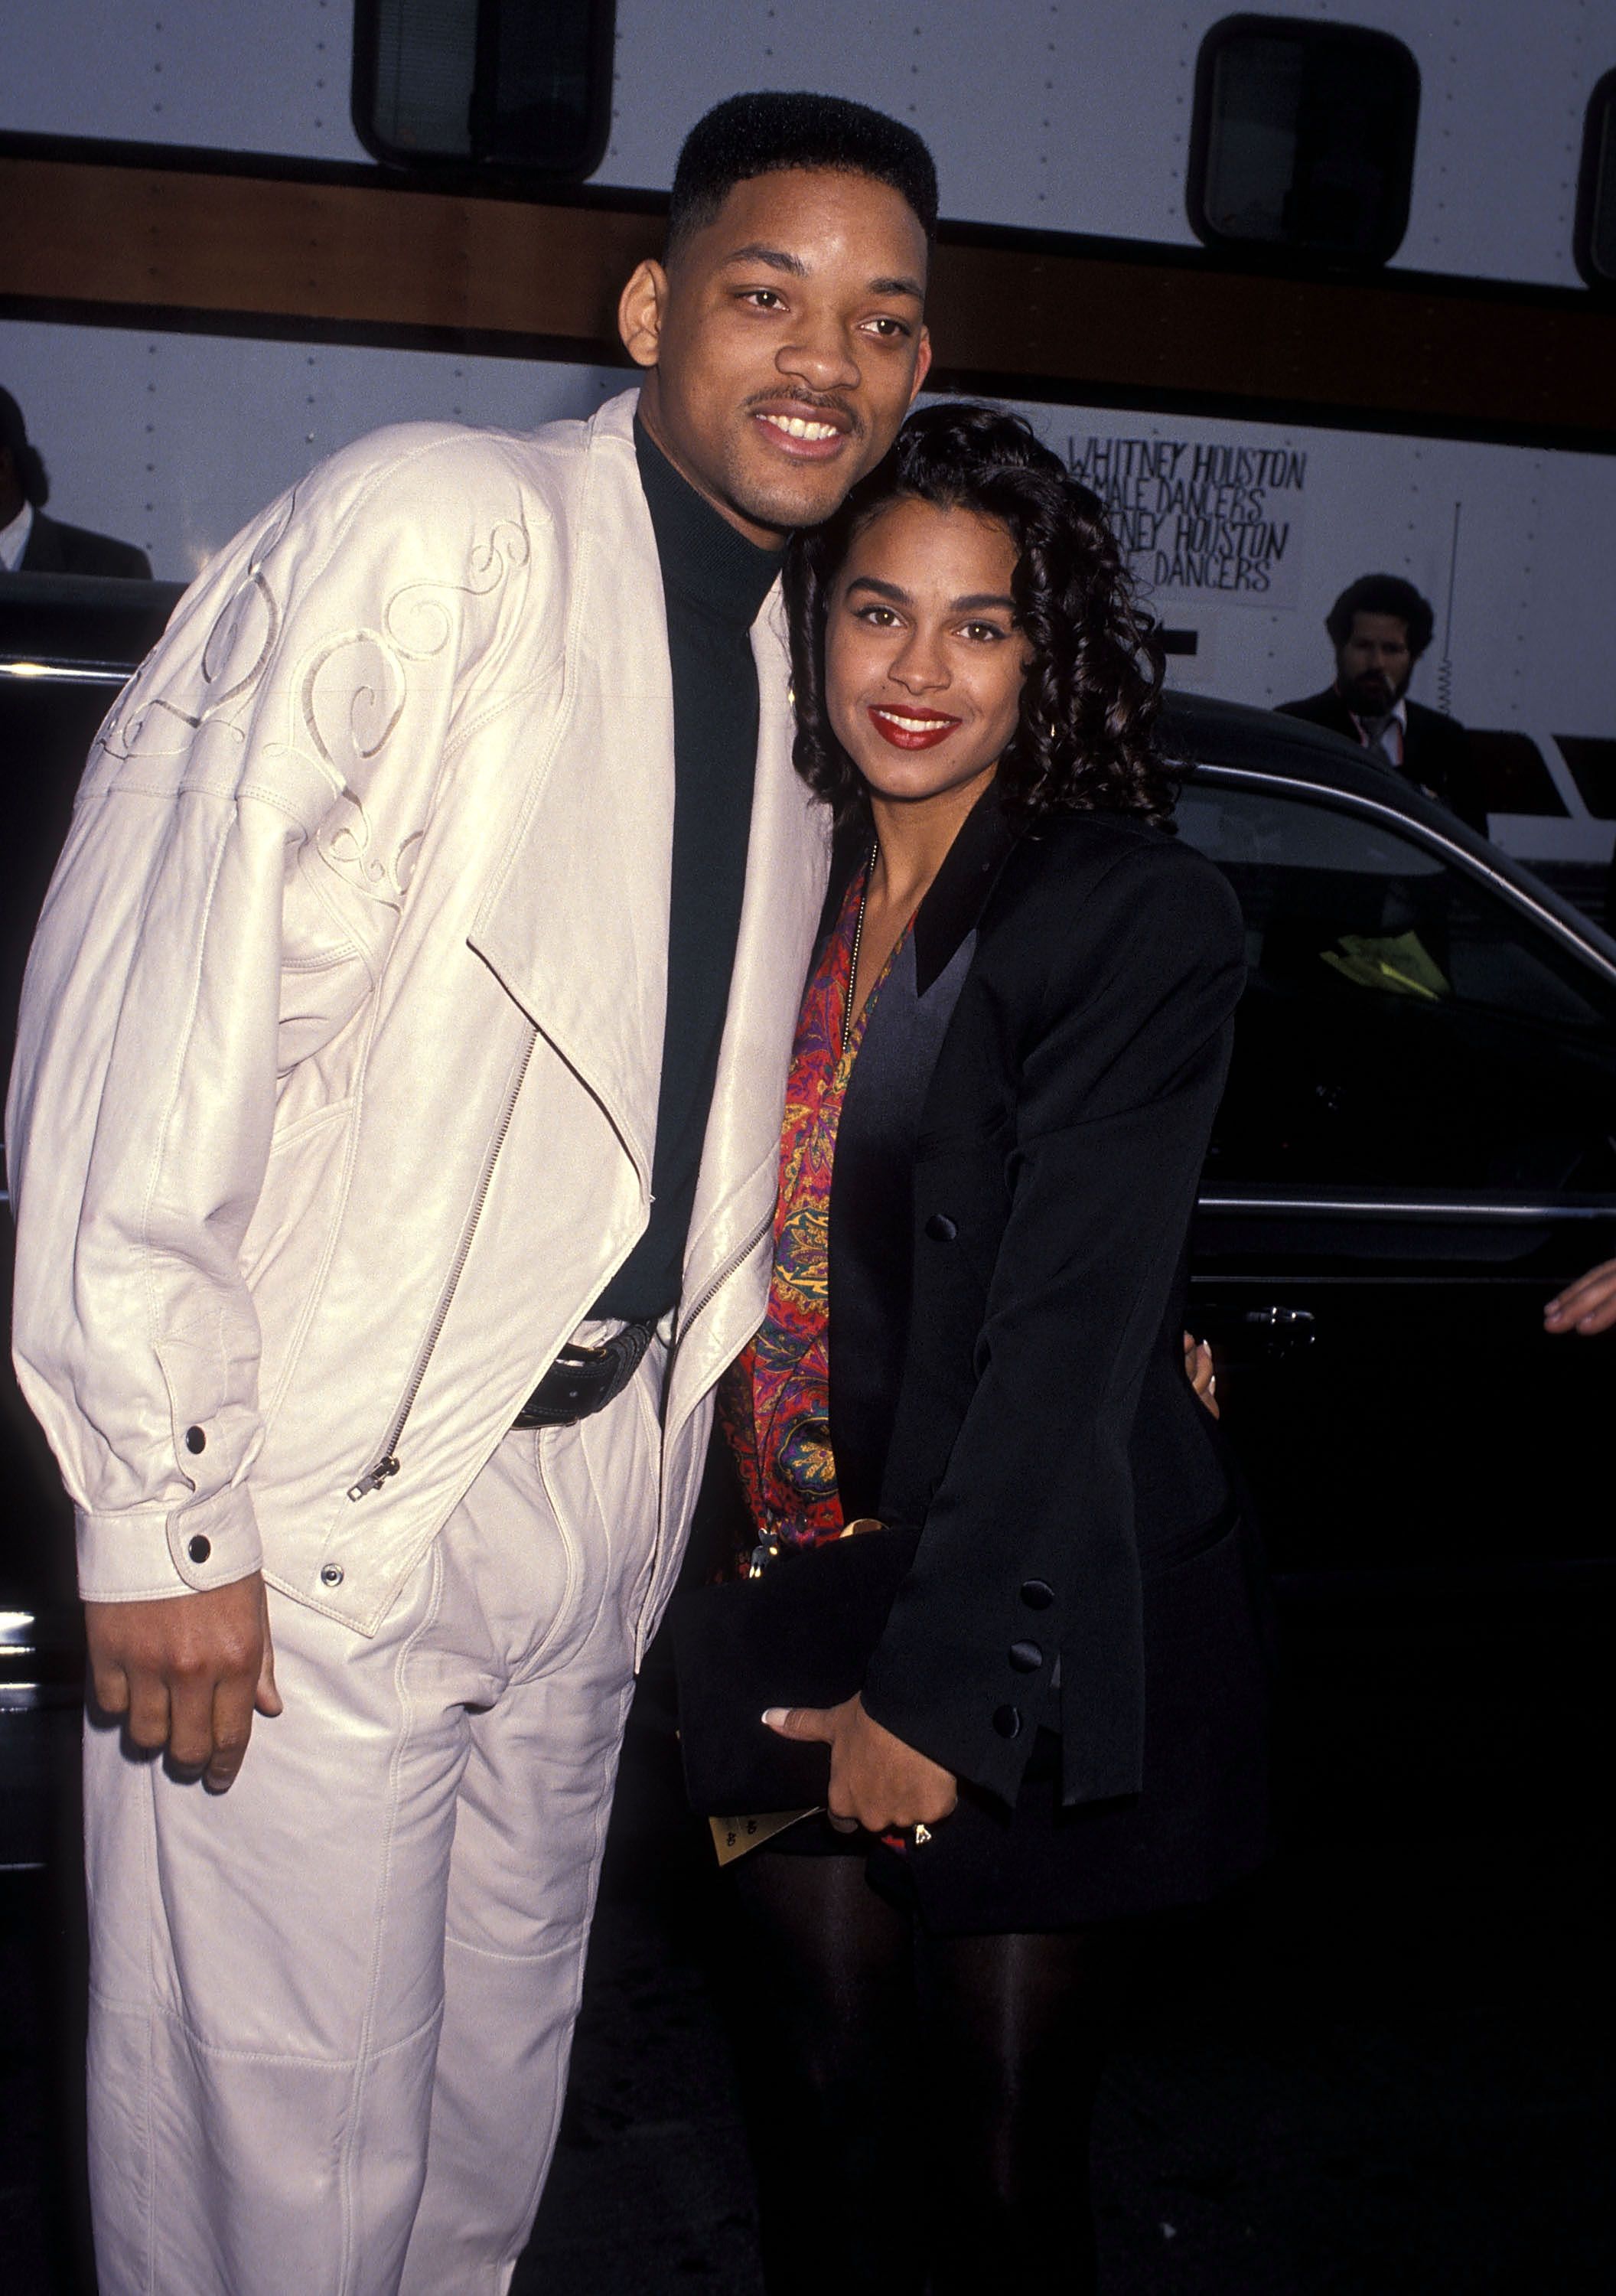 Will Smith and Sheree Zampino at the 19th Annual American Music Awards on January 27, 1992, in Los Angeles, California | Photo: Ron Galella, Ltd./Ron Galella Collection/Getty Images